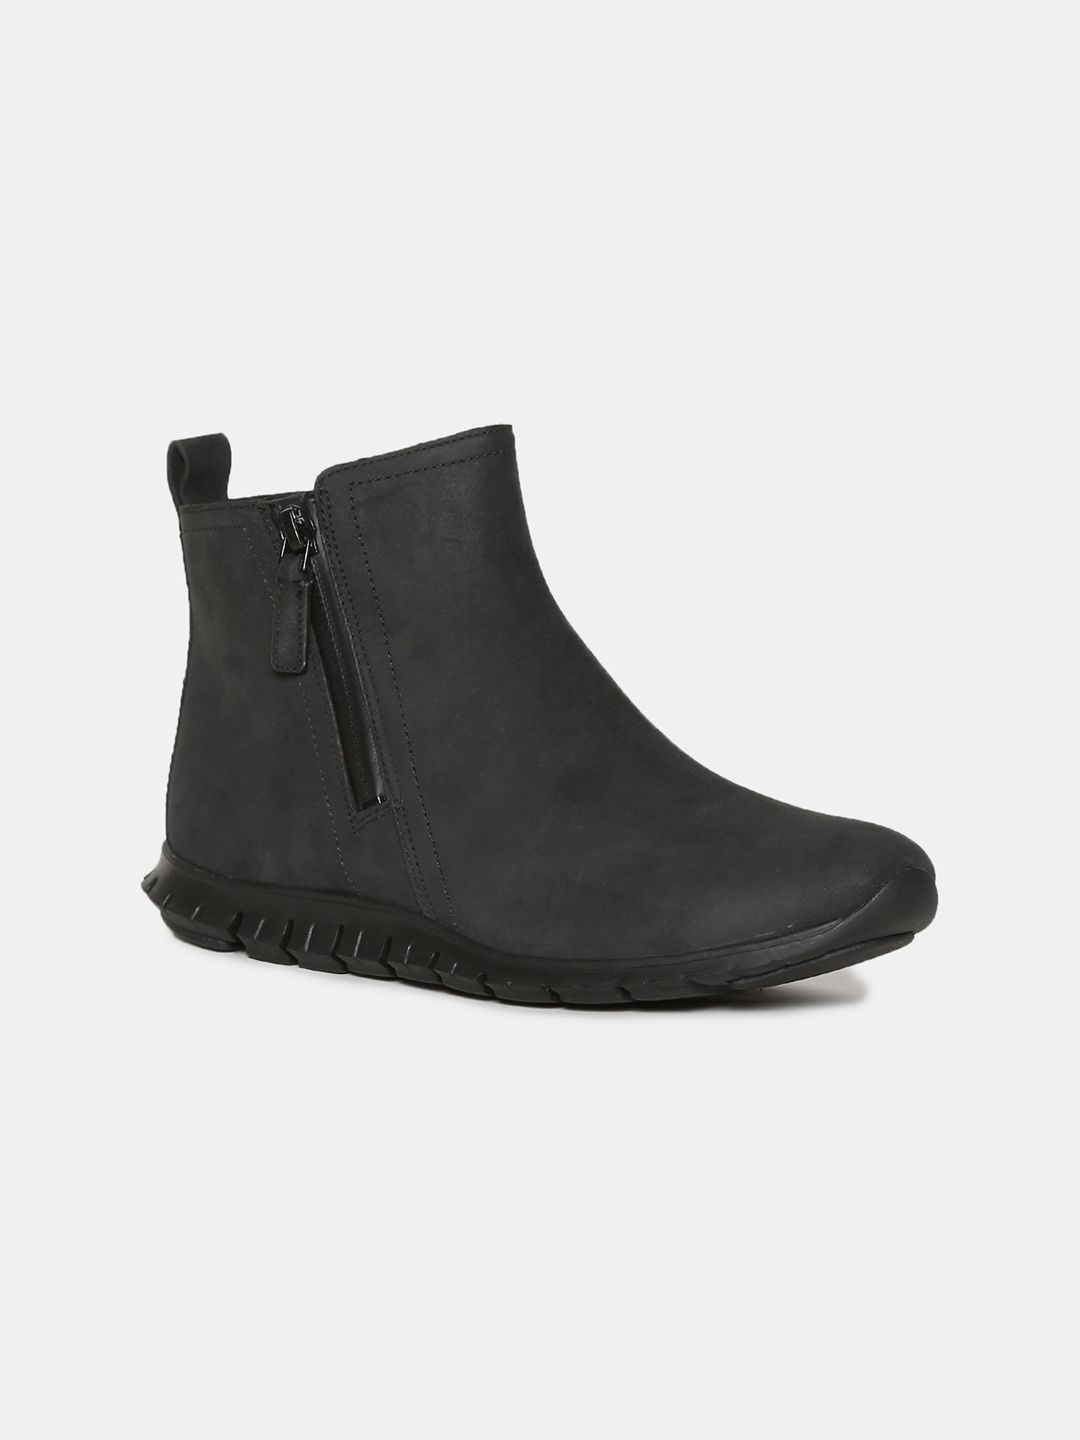 Cole Haan Women Black Suede Flat Boots Price in India